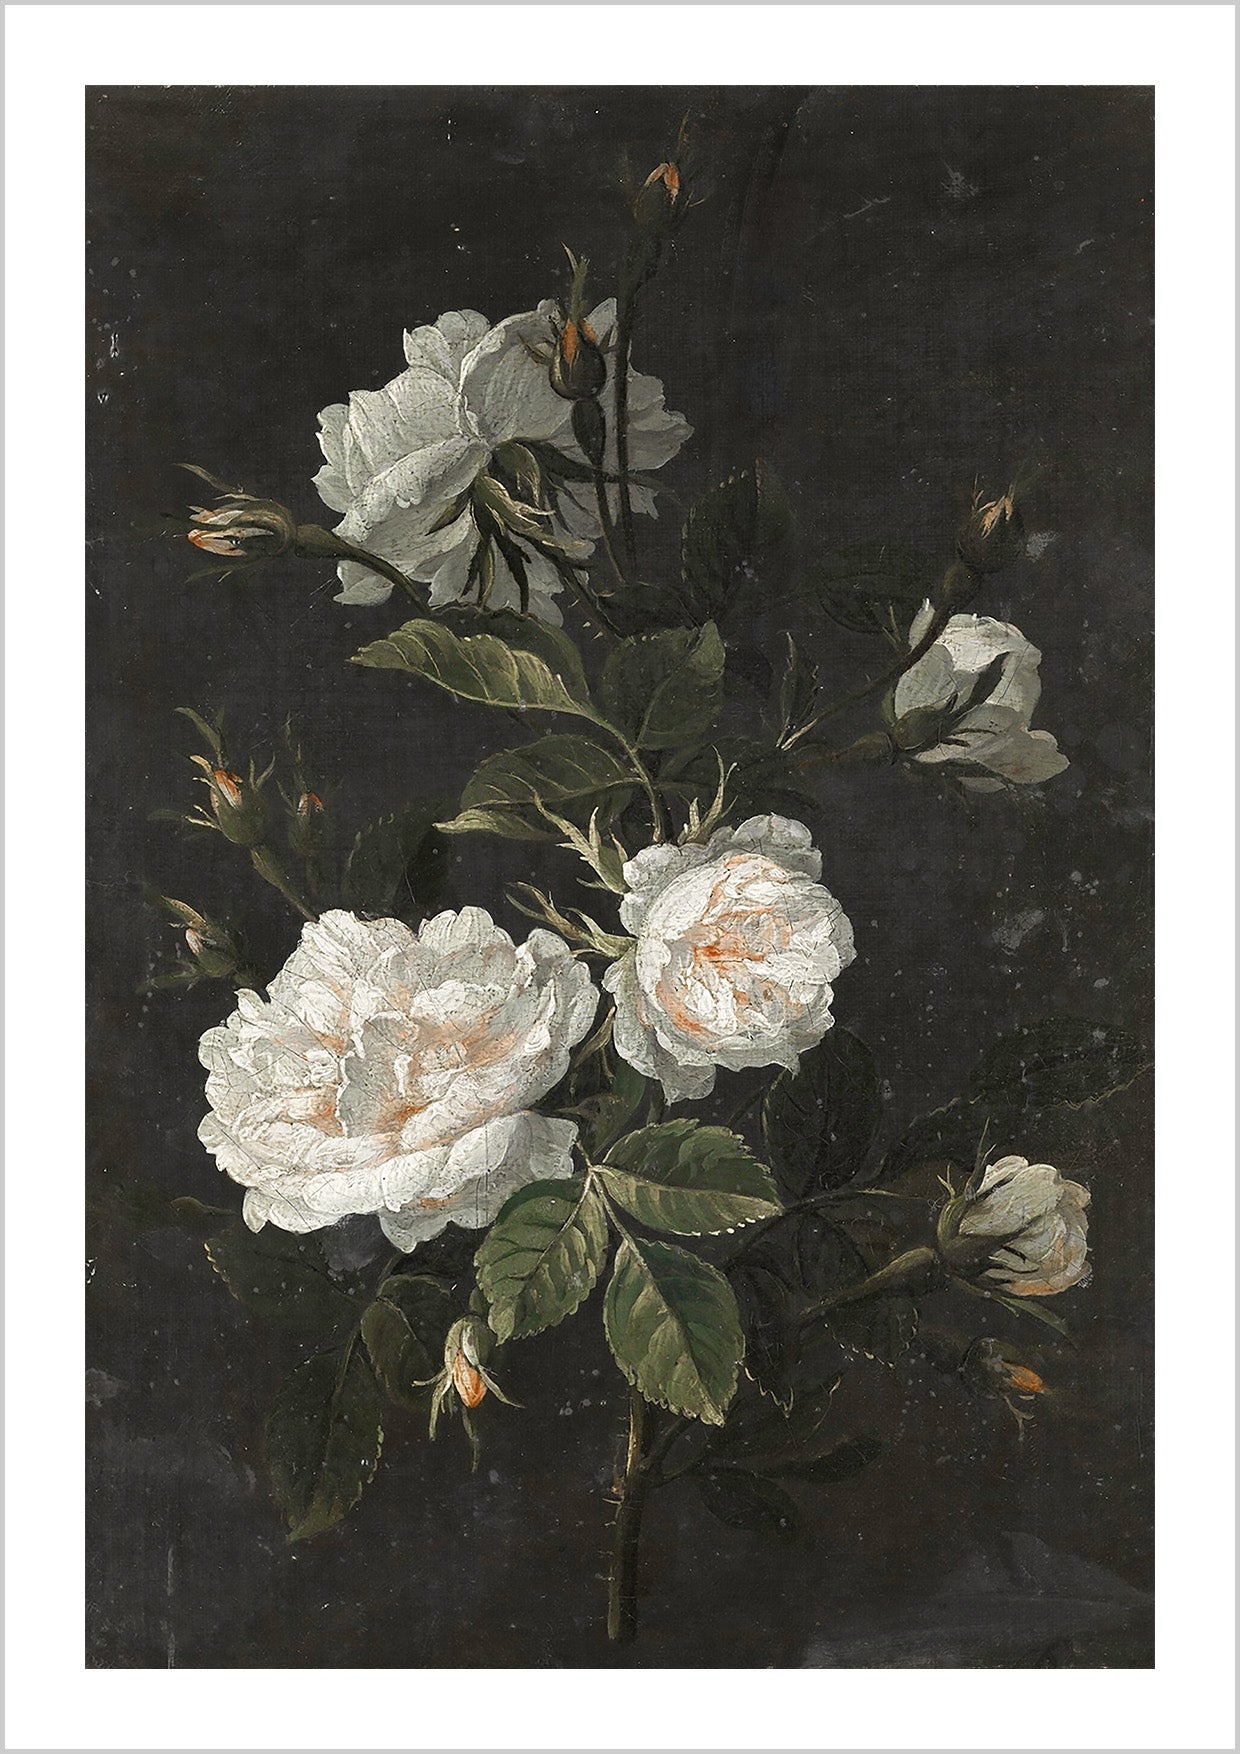 Still Life Roses was painted by the French artist Antoine Monnoyer during the 19th century